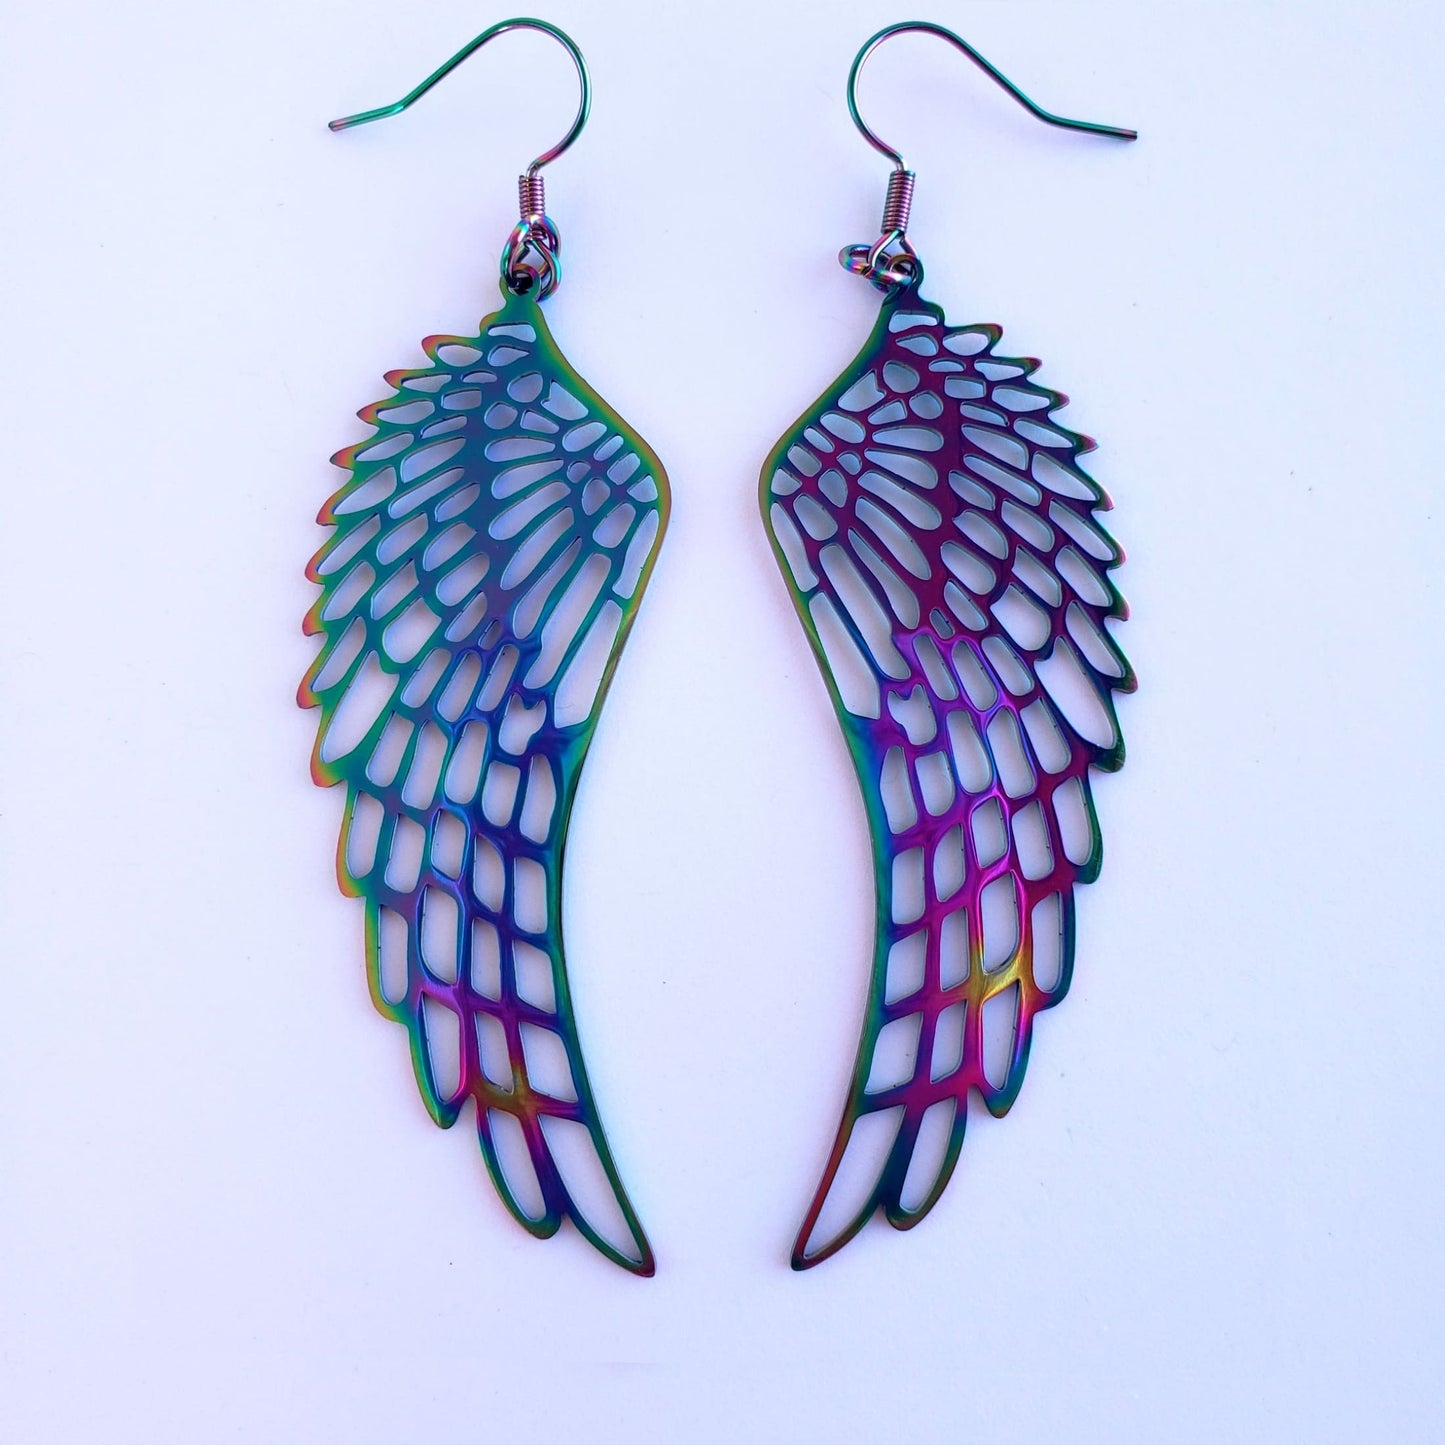 Rainbow Anodized Stainless Steel Angel Wing Earrings from Confetti Kitty, Only 10.99